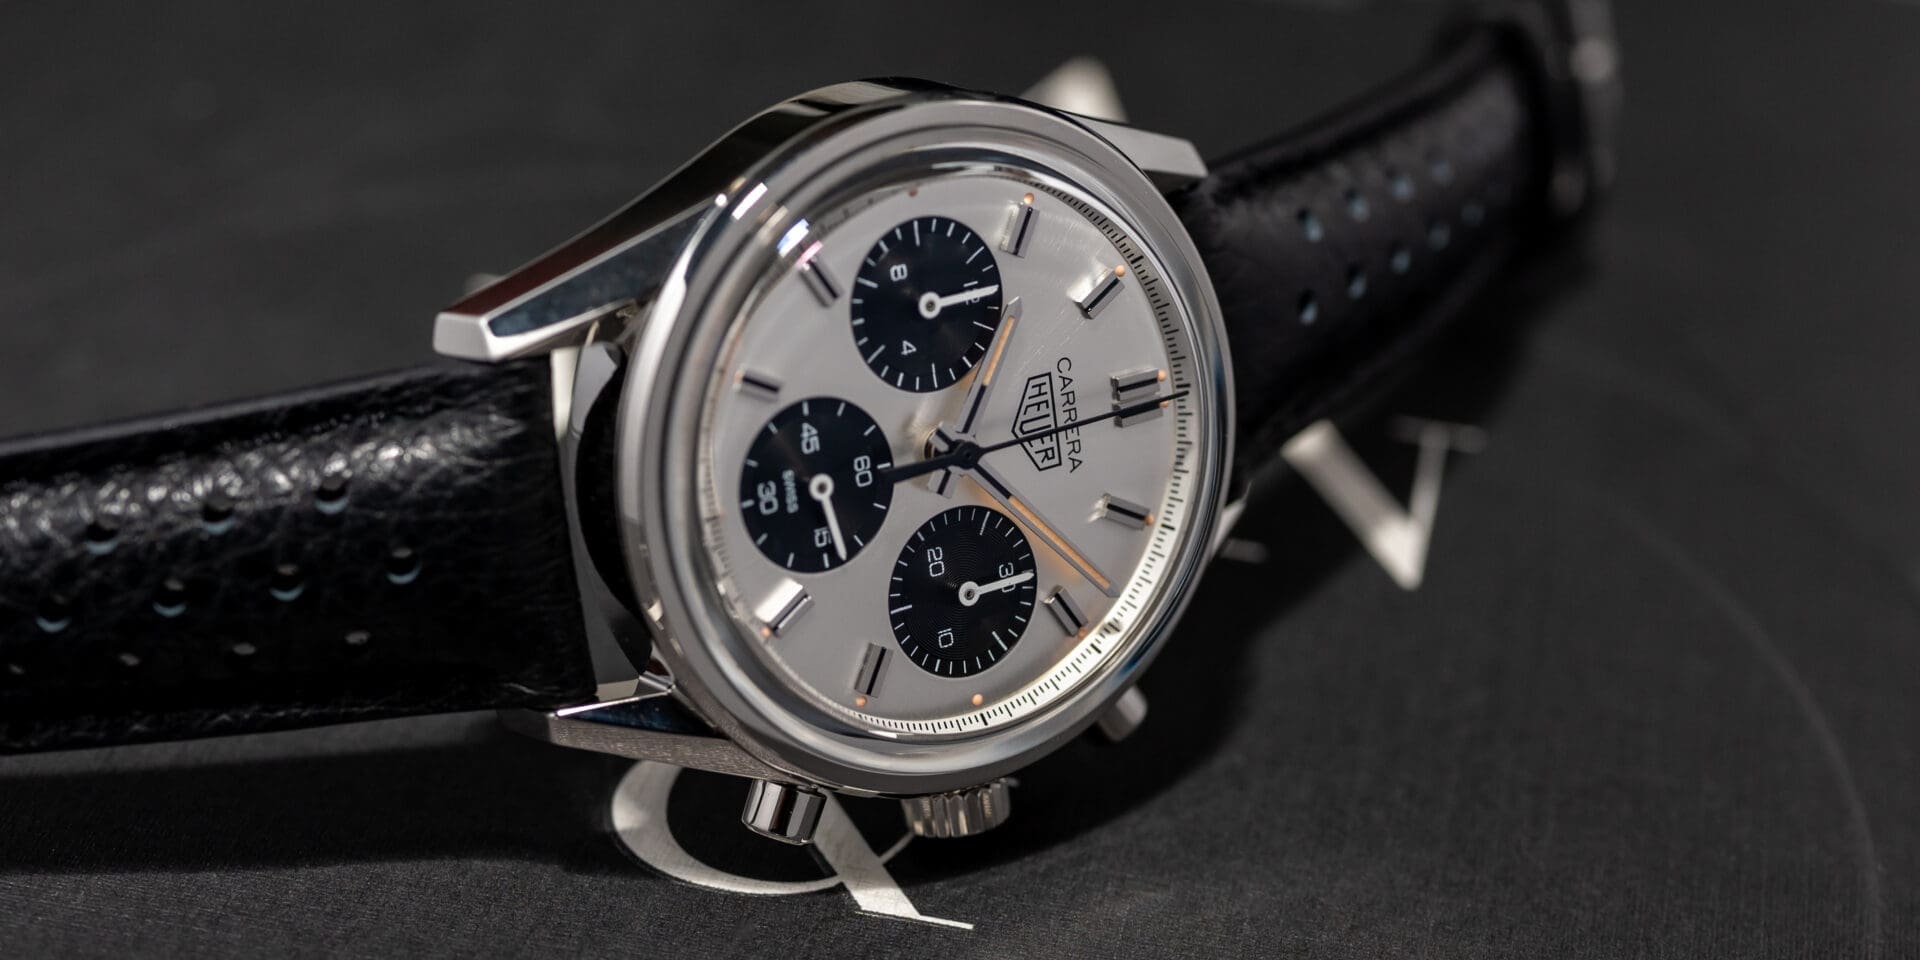 History and tradition meet with the TAG Heuer Carrera 60th Anniversary